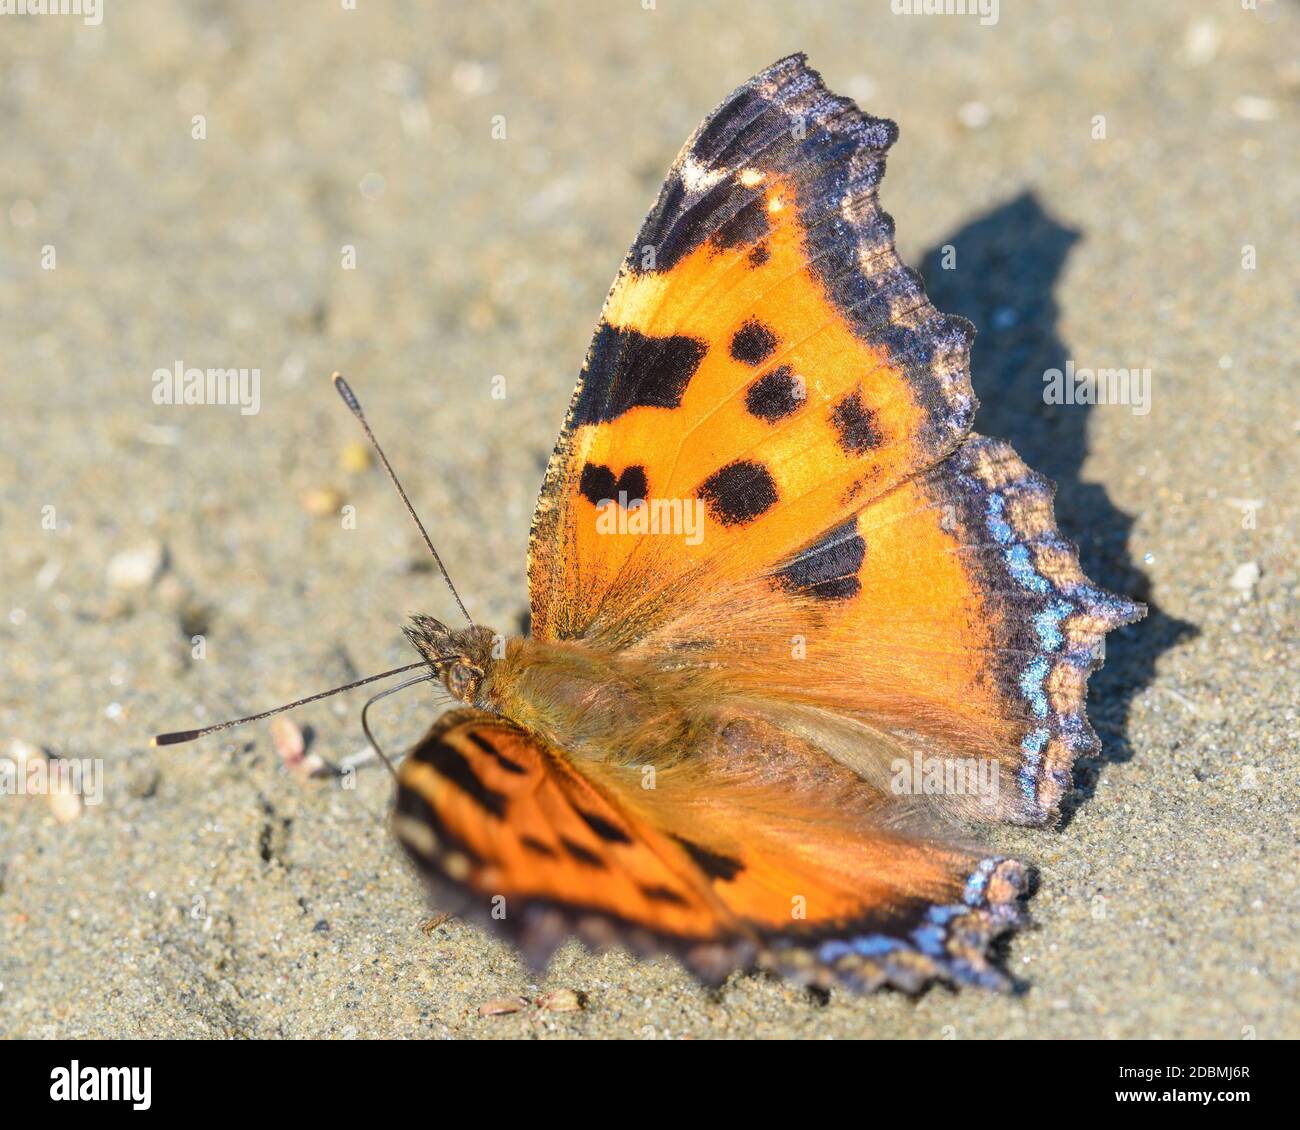 aglais urticae butterfly on the Ground, top view, close-up Stock Photo